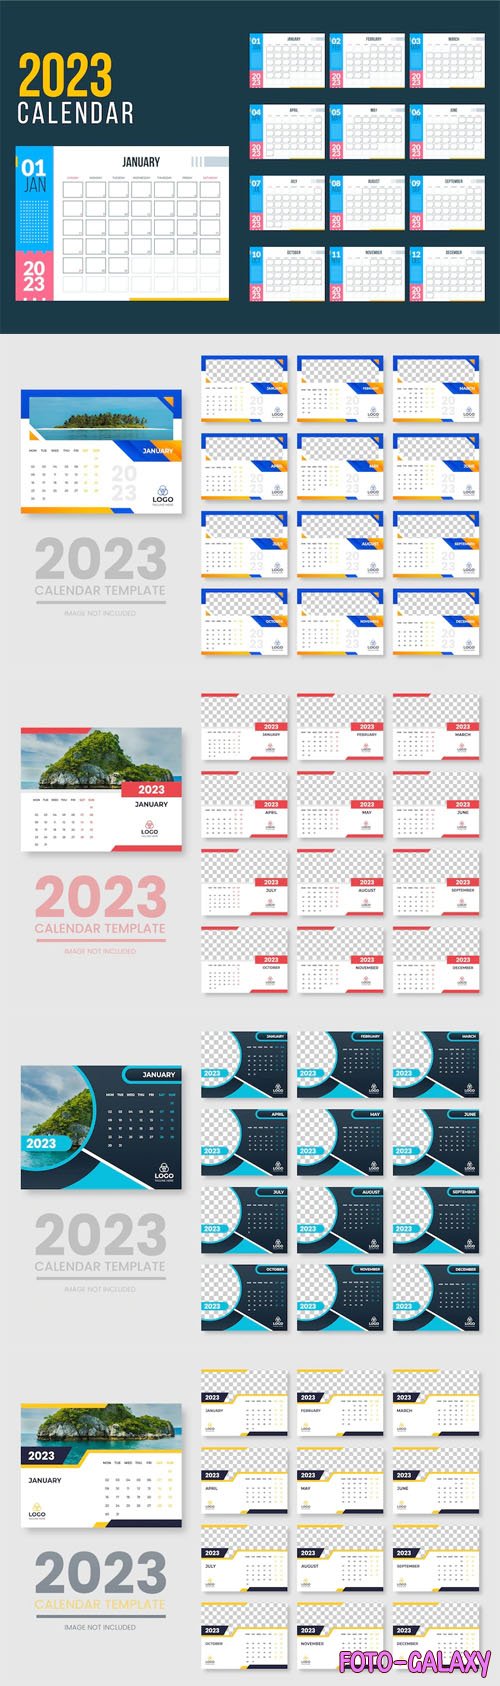 5 Clean Calendars for New Year 2023 Vector Templates